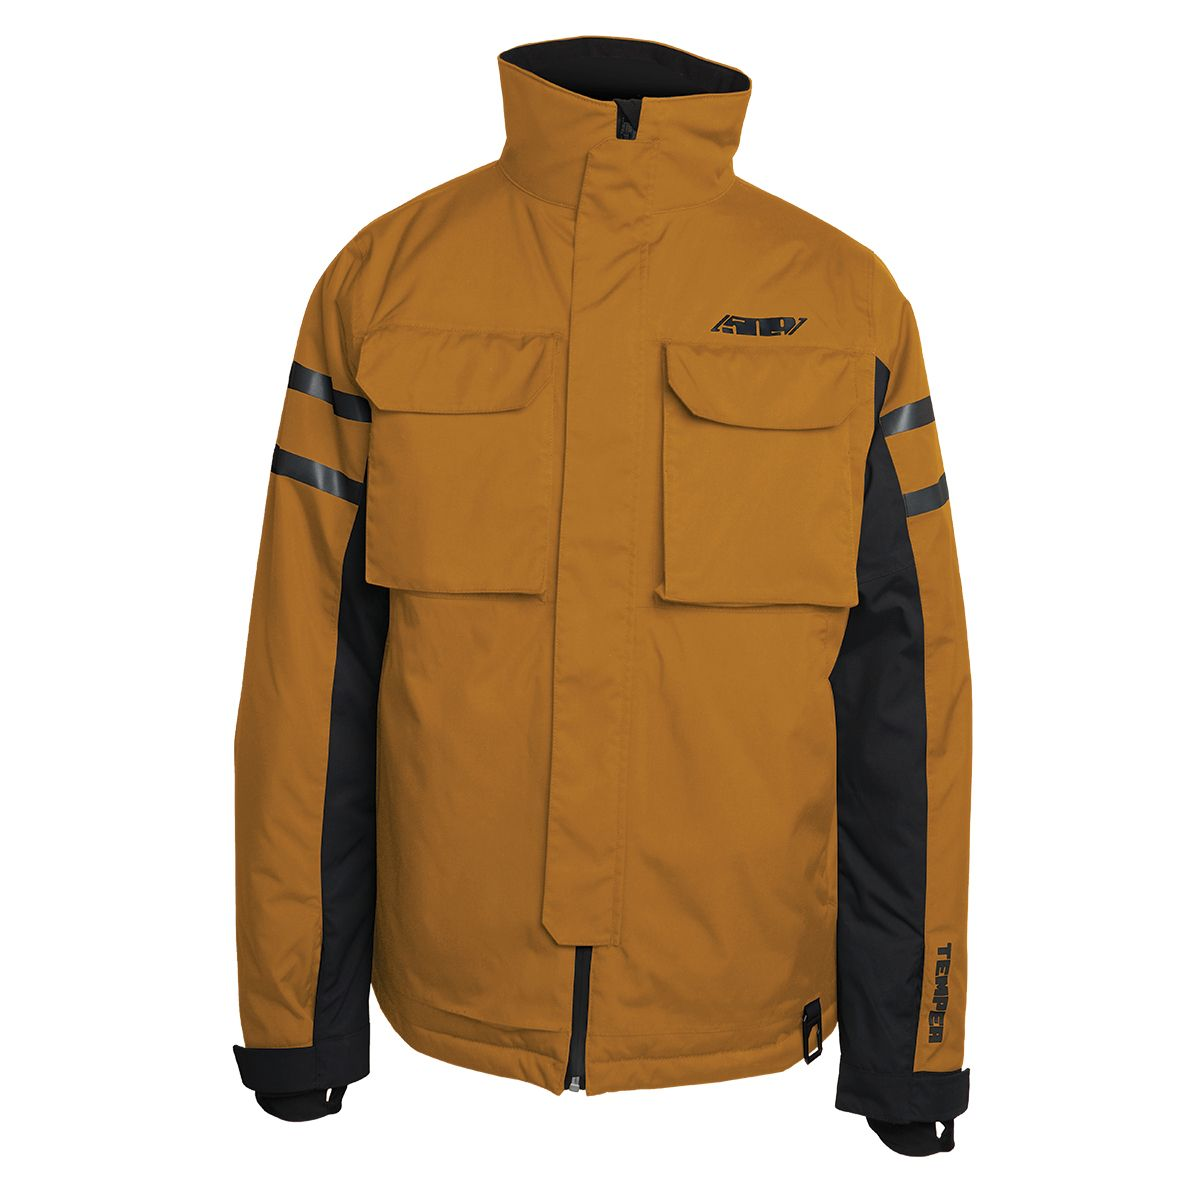 509 insulated jackets for men temper